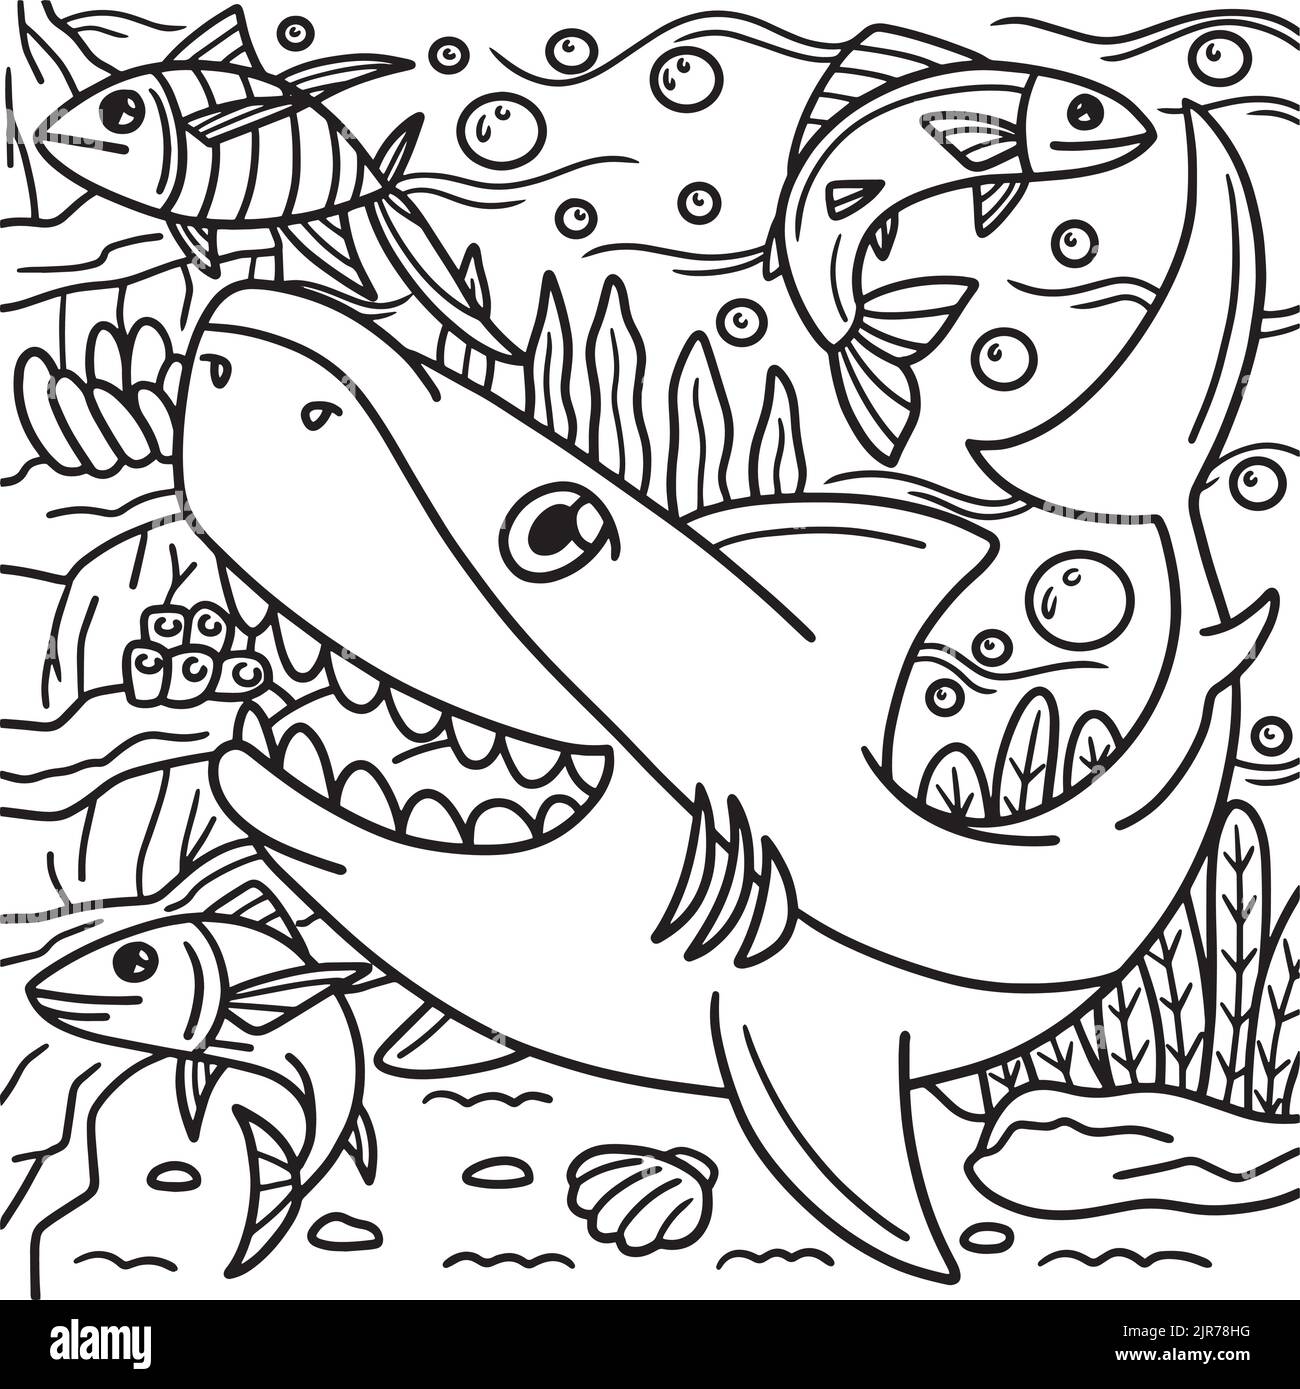 Great White Shark Coloring Page for Kids Stock Vector